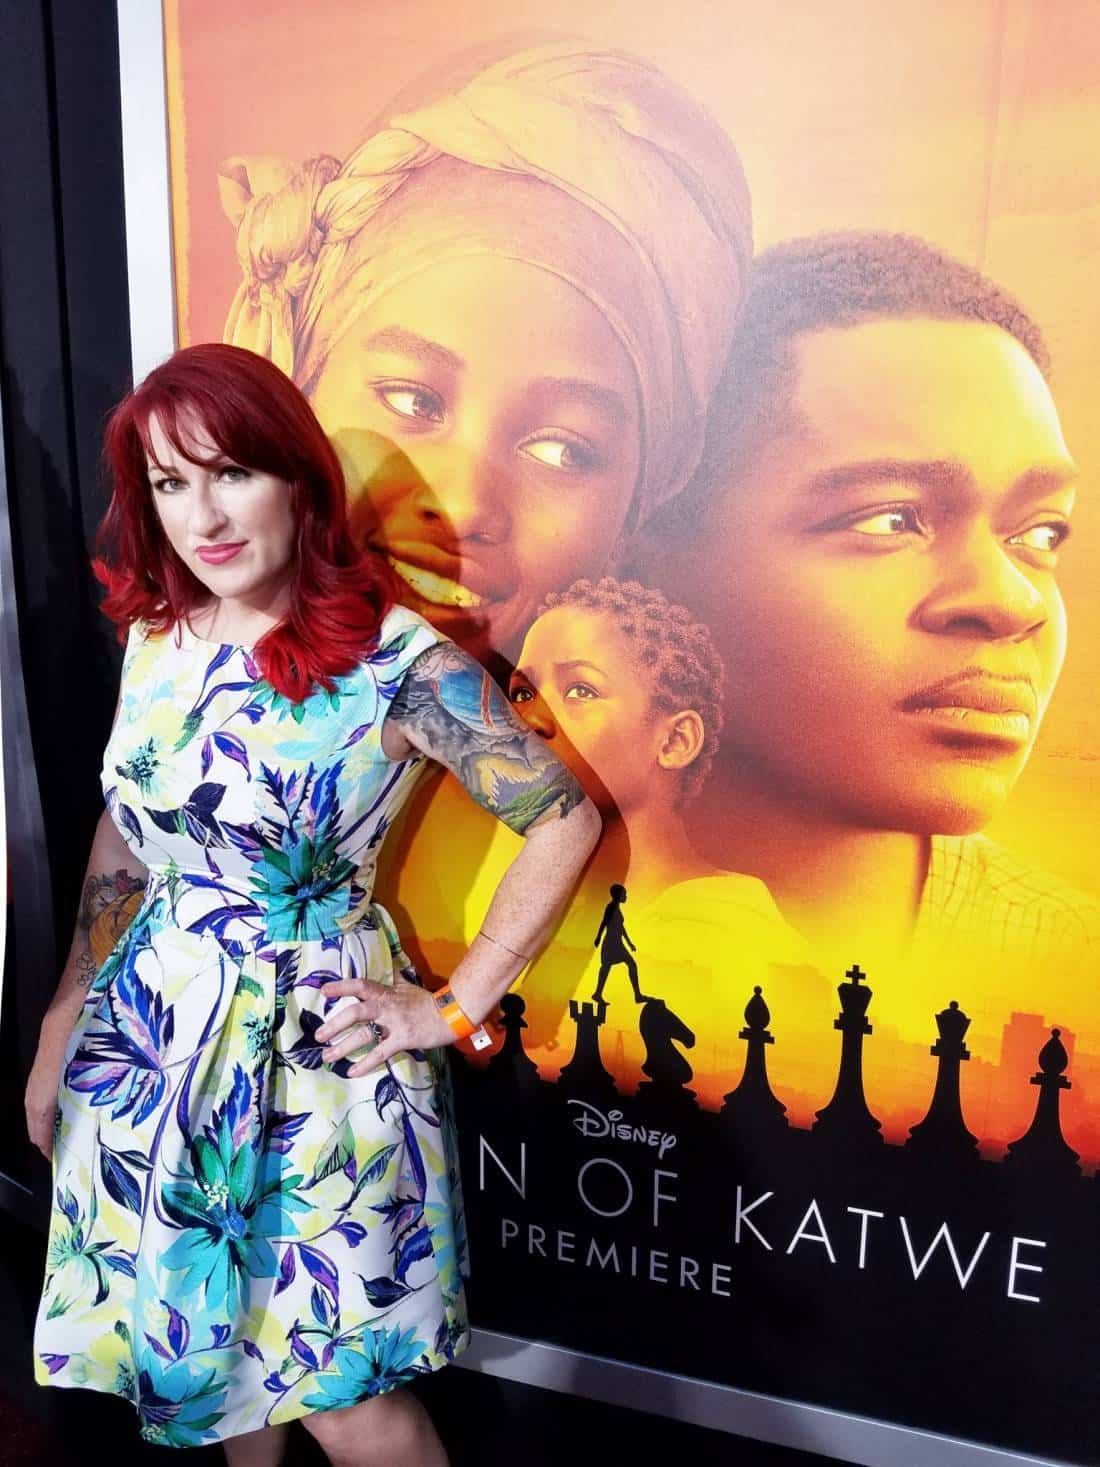 The Fun Premiere Of Queen Of Katwe! Check Out My Experience